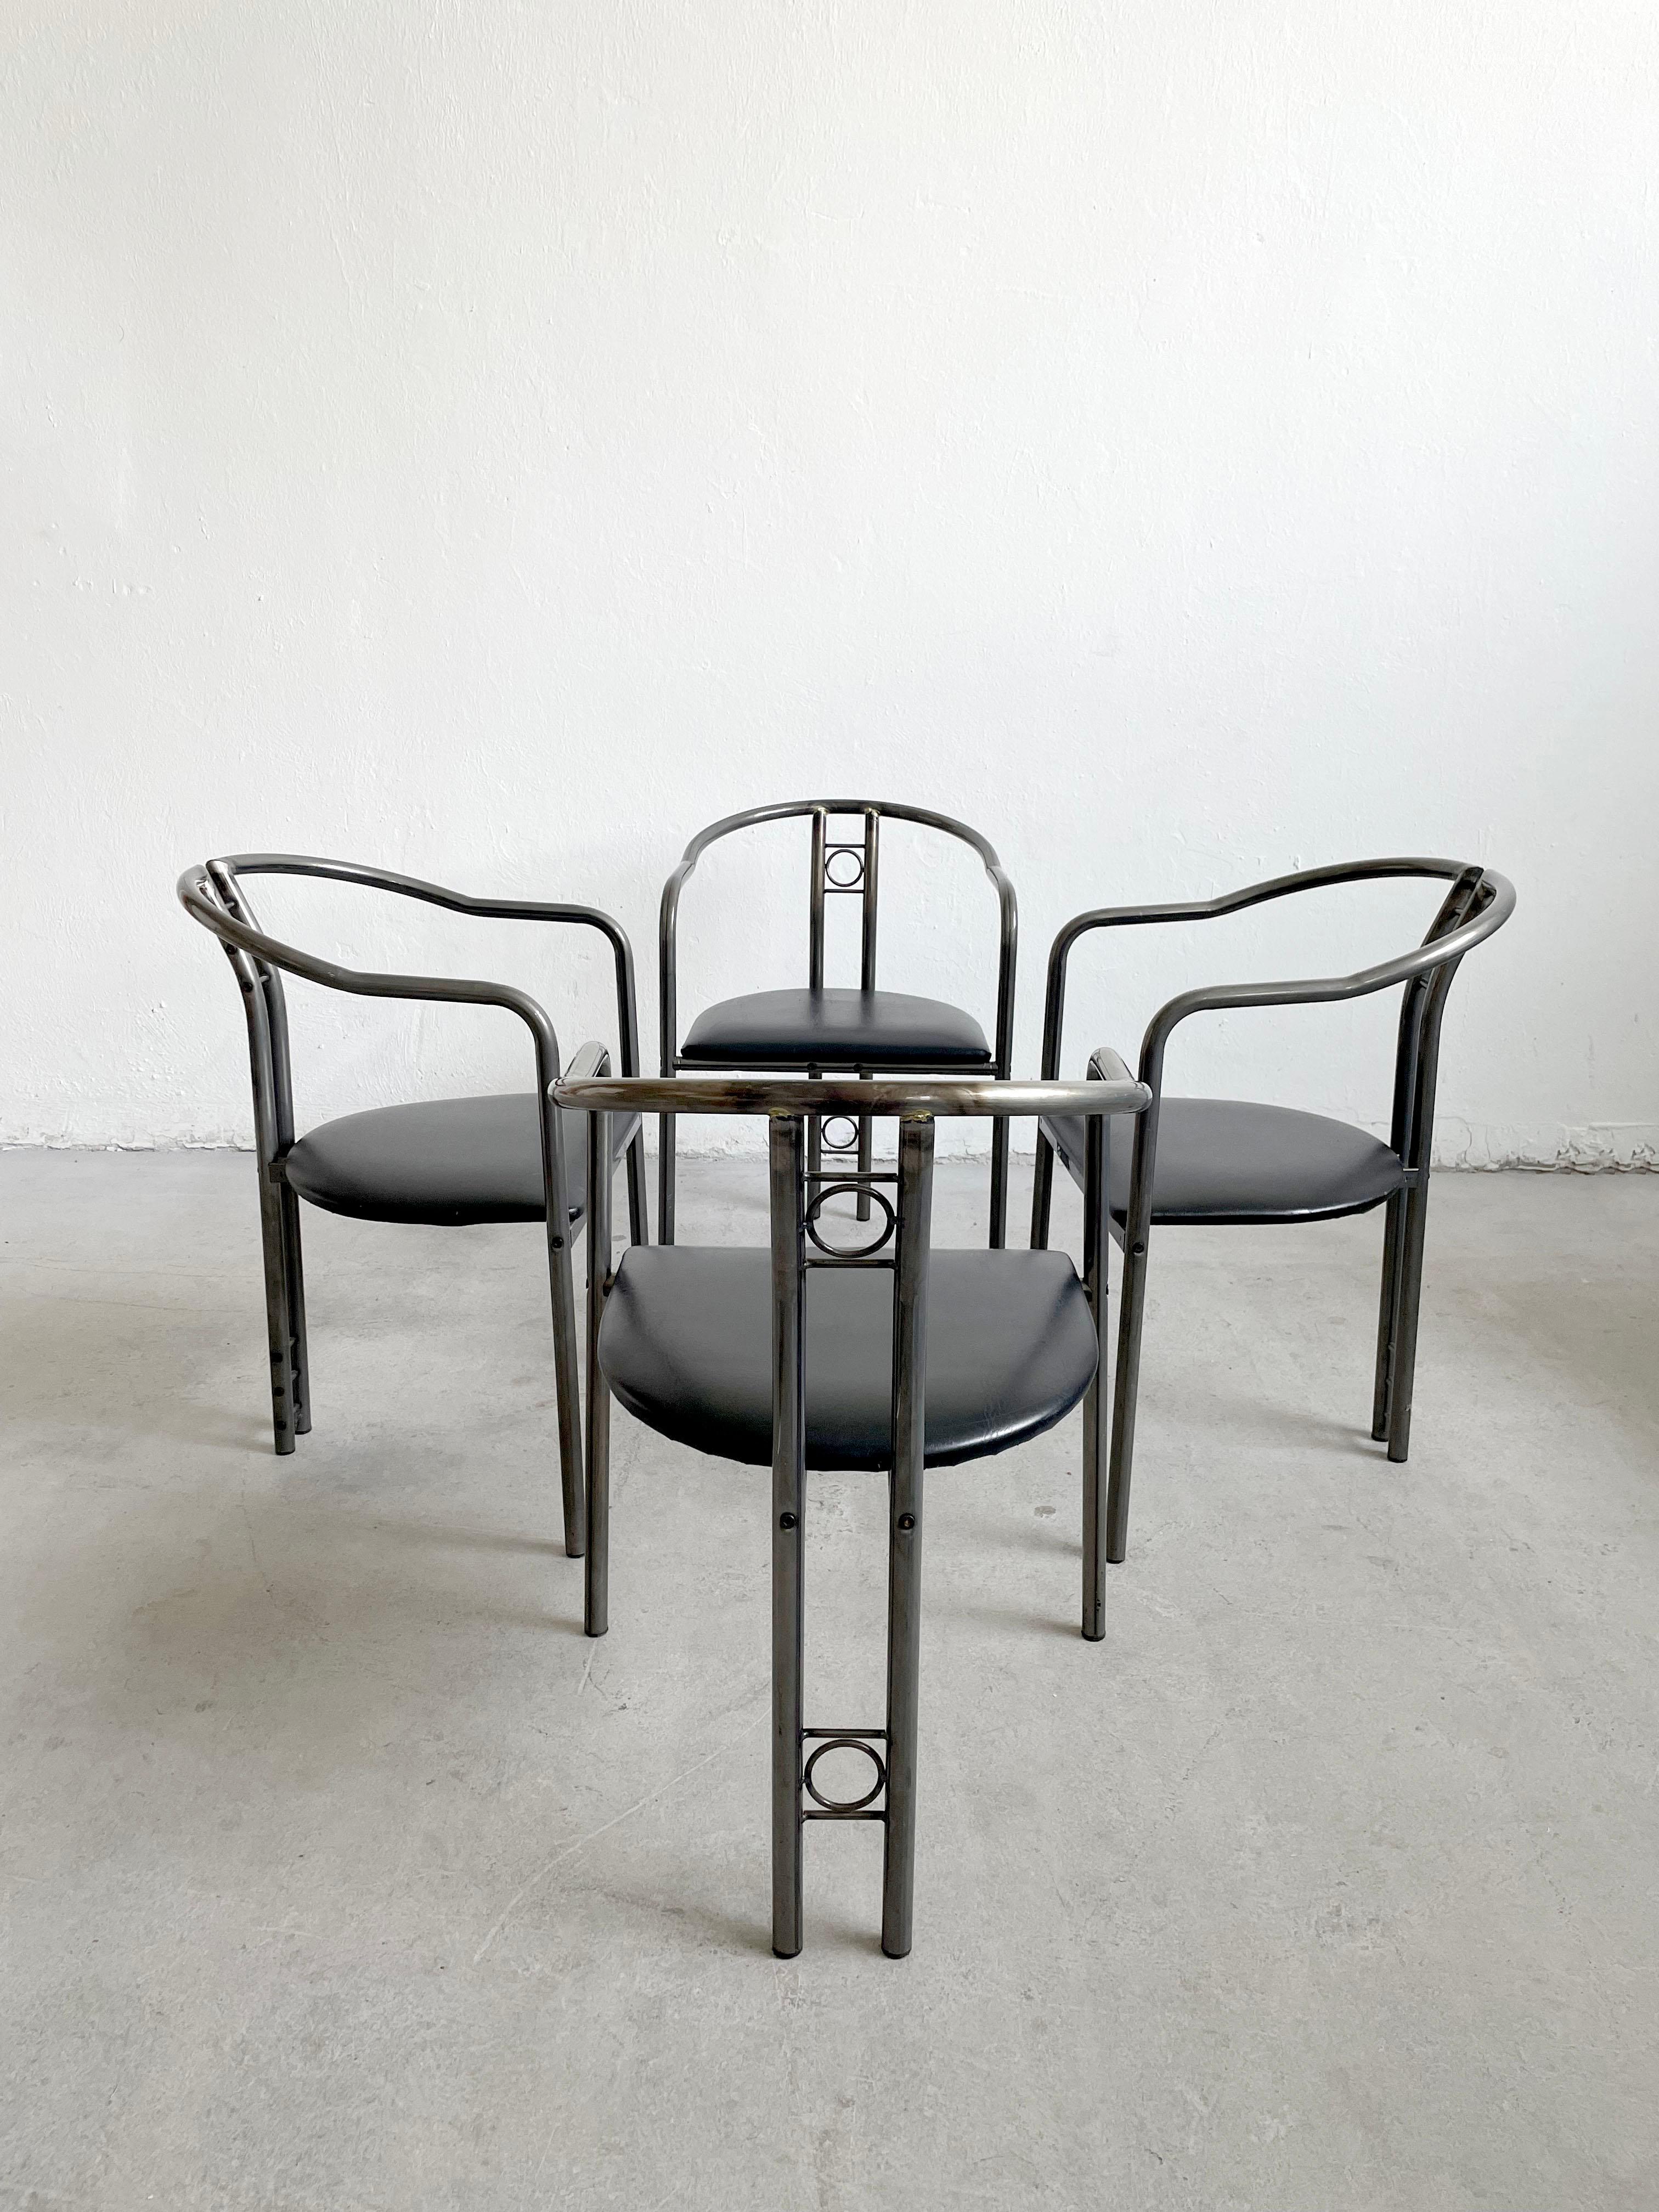 Set of 4 Postmodern Dining Chairs, Belgium 1980's For Sale 4